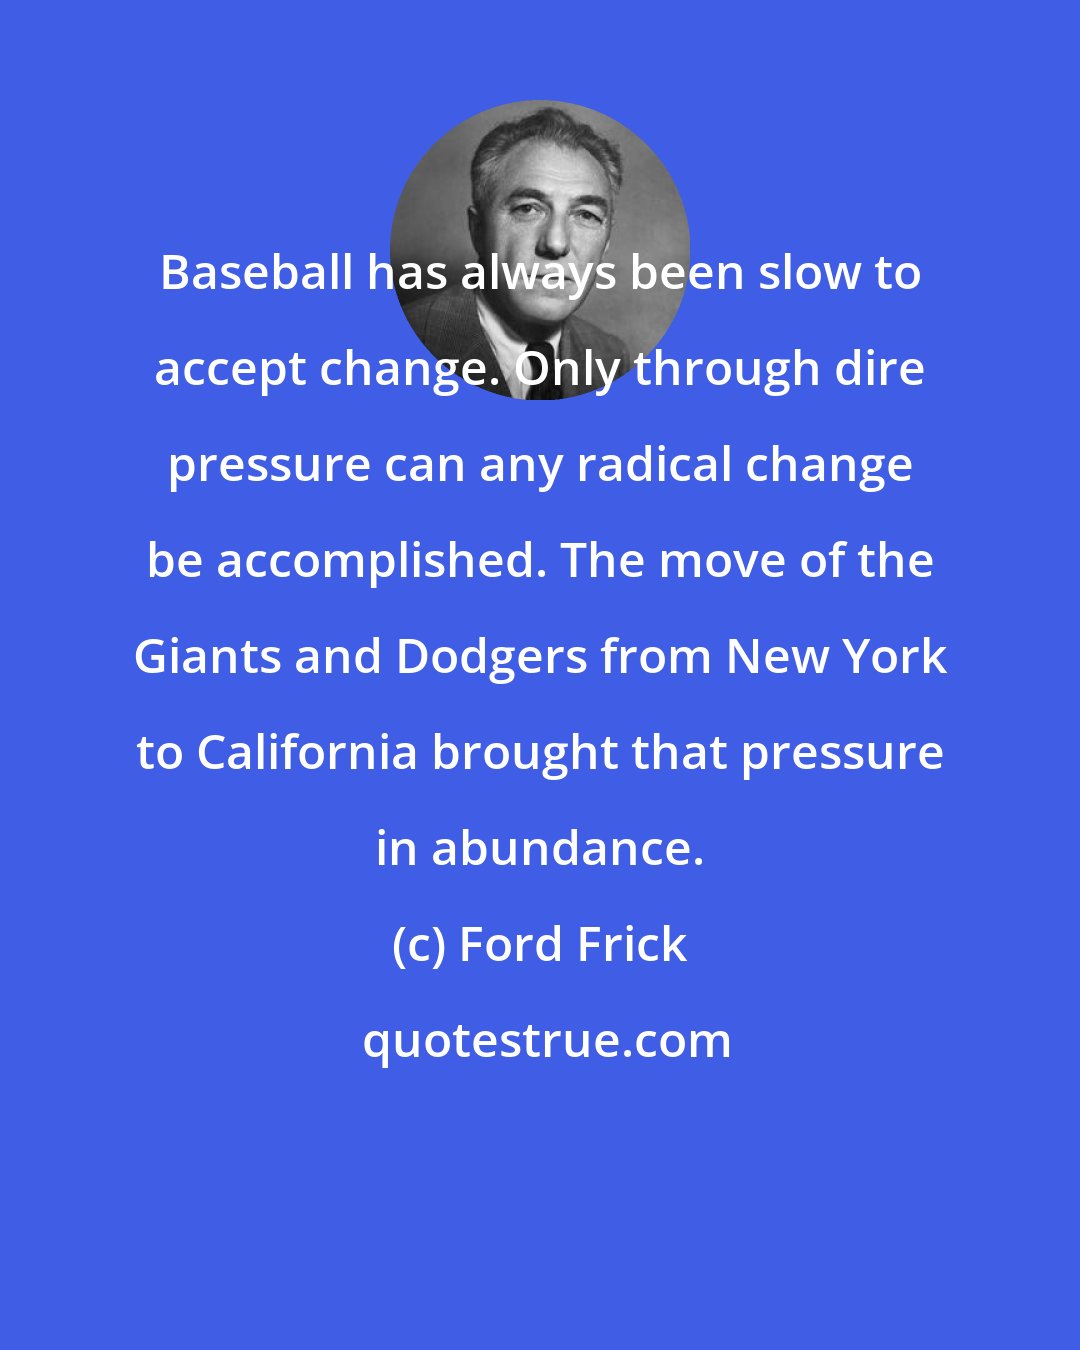 Ford Frick: Baseball has always been slow to accept change. Only through dire pressure can any radical change be accomplished. The move of the Giants and Dodgers from New York to California brought that pressure in abundance.